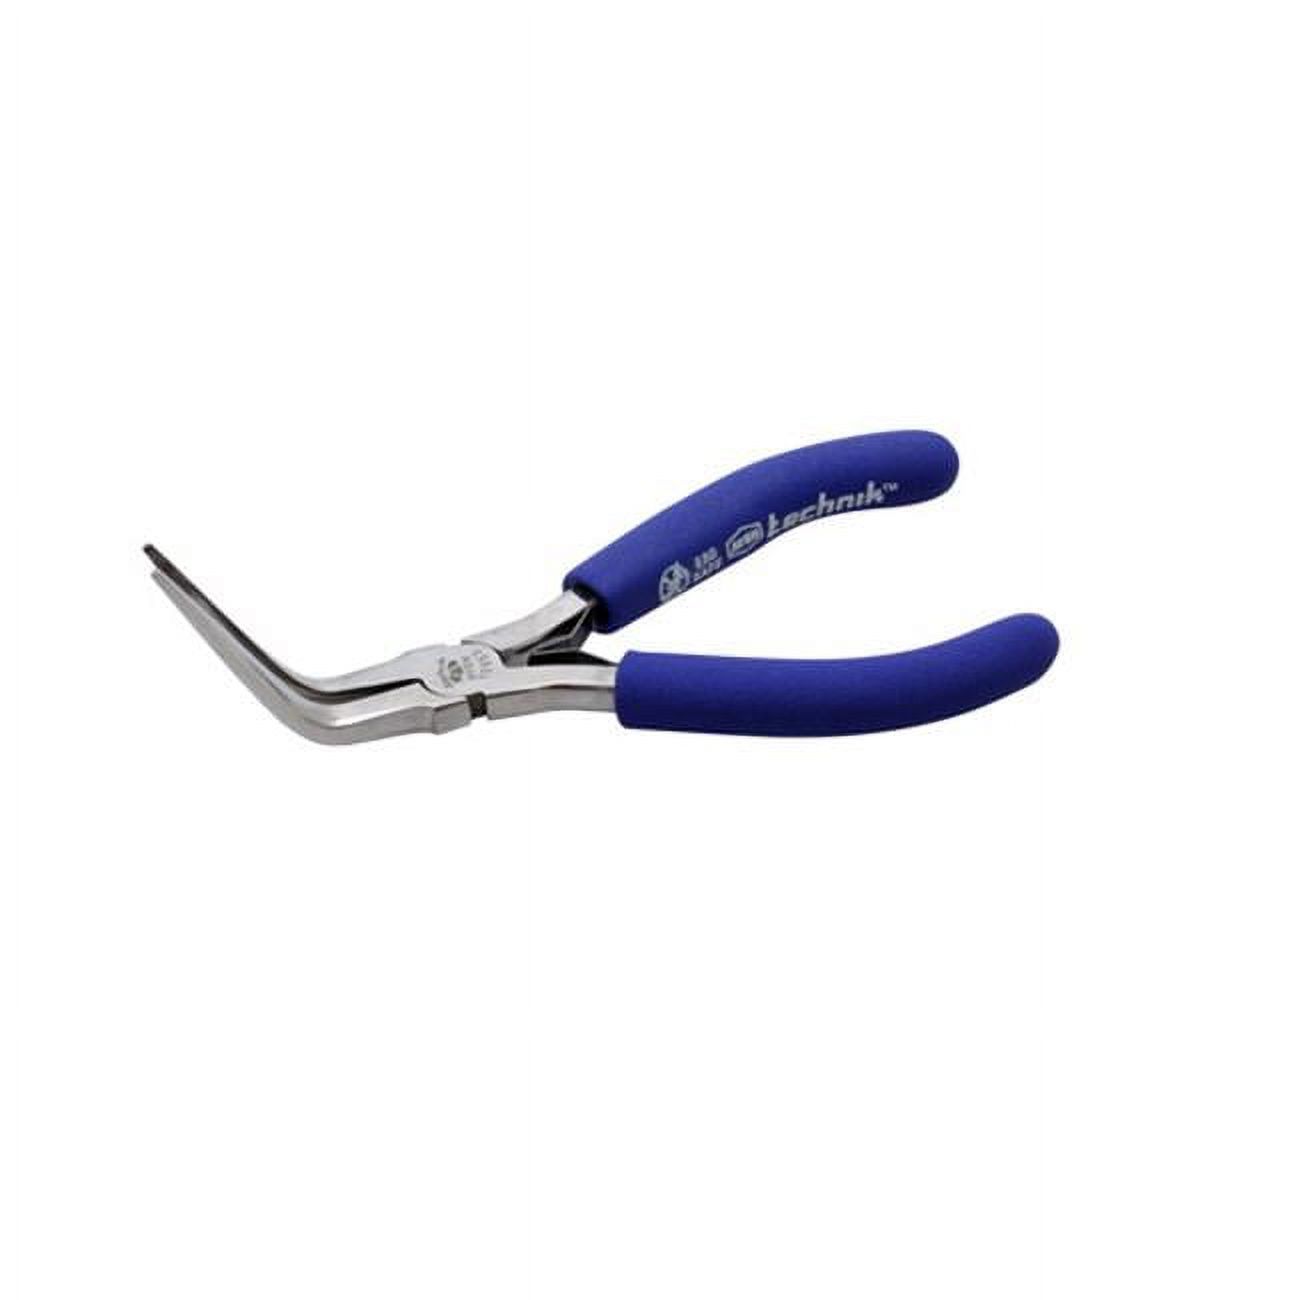 Aven 10953 Pliers Bent Needle, Nose, 6, Serrated